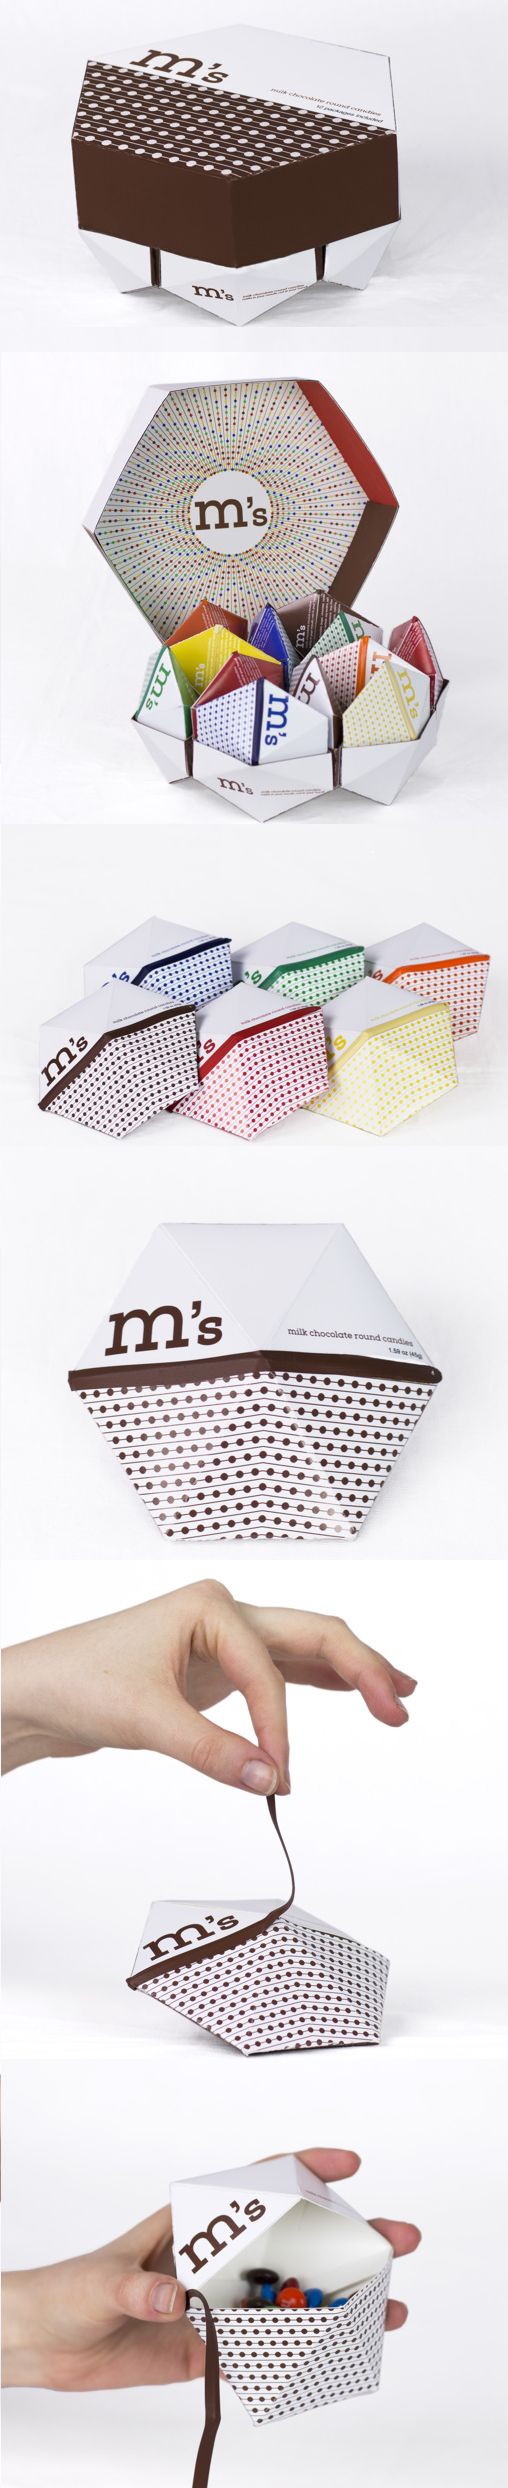 M&M’s packaging gets a concept redesign